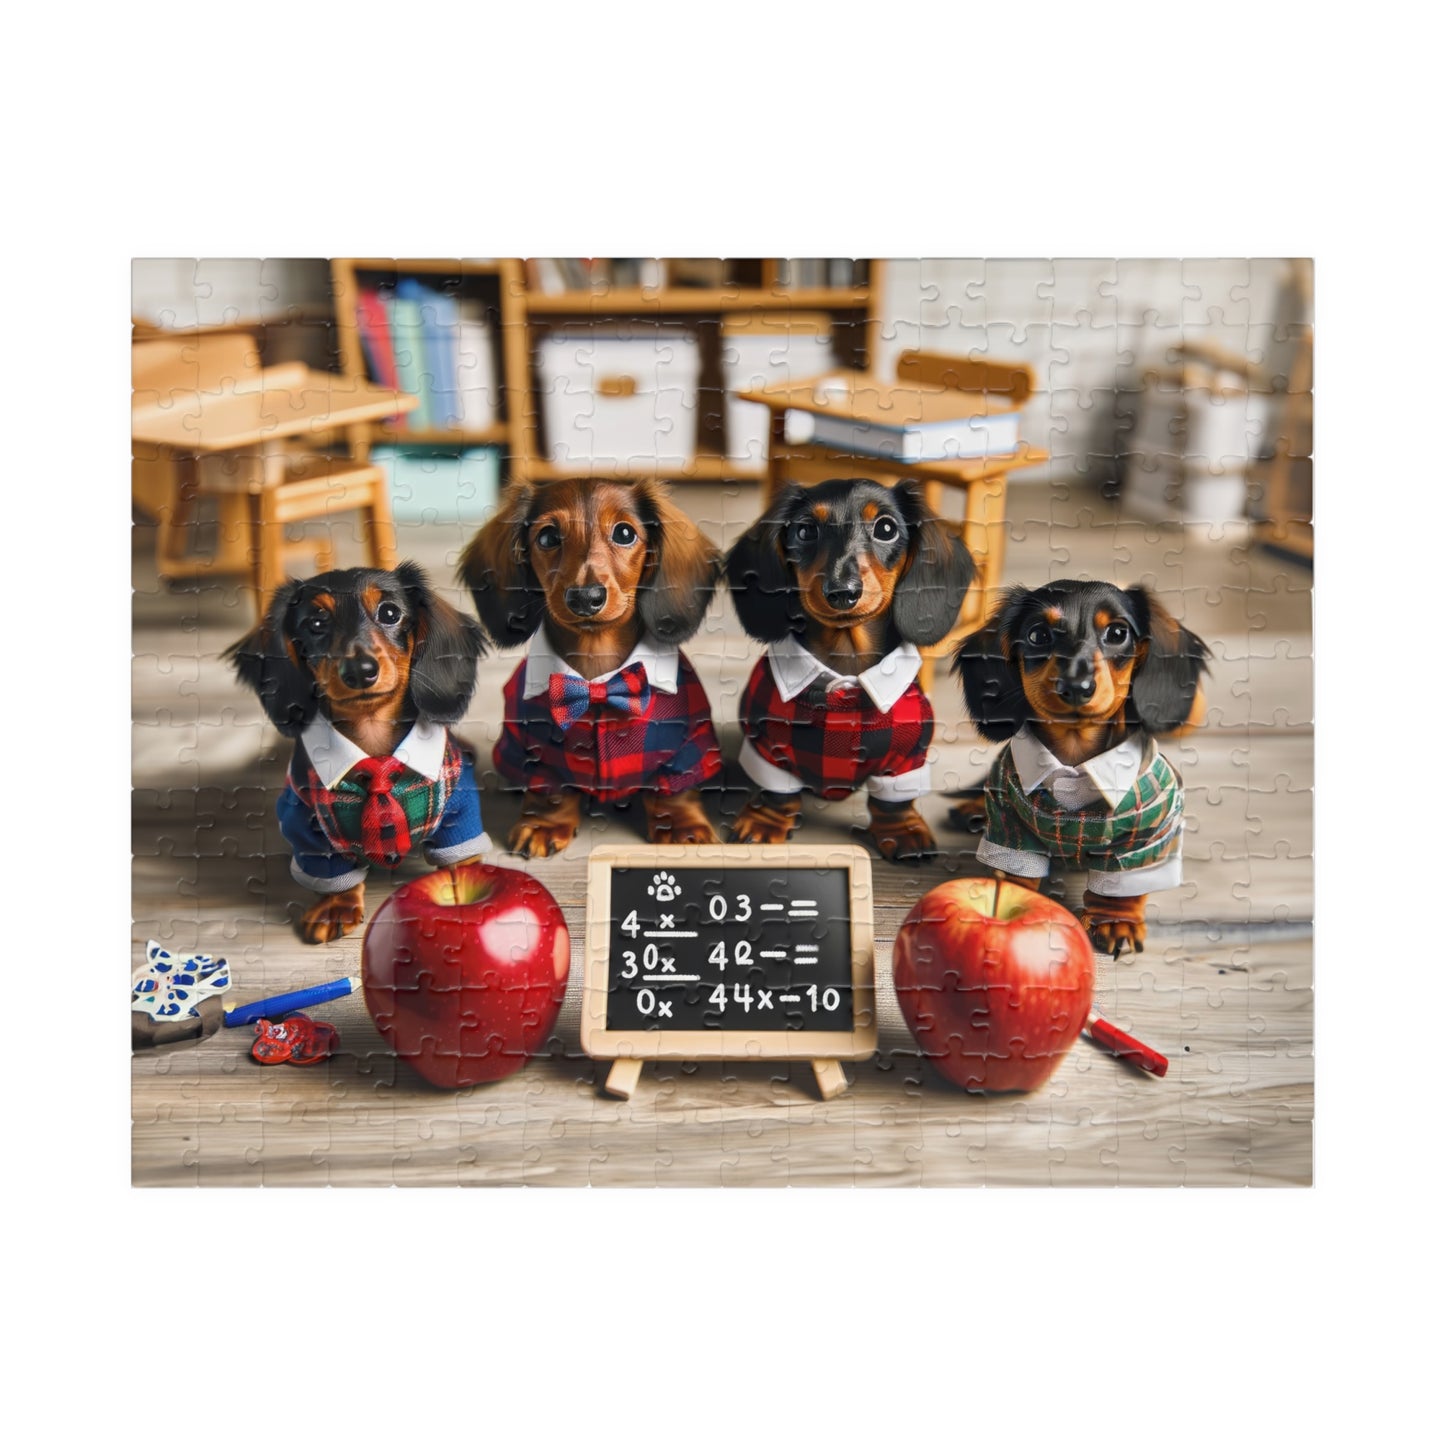 Adorable Mini Dachshund Classroom Puzzle - Doxie Puppy Scholars, Horizontal Jigsaw, Educational Family Game (110/252/520/1014 Pieces)